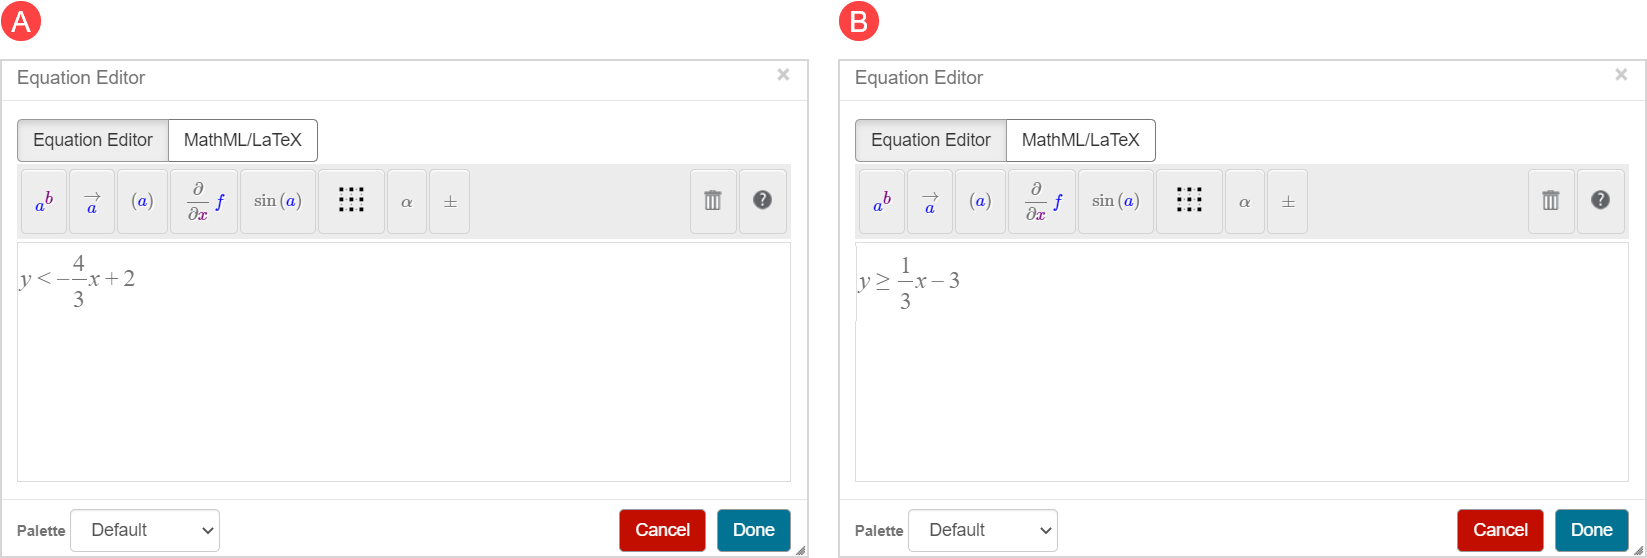 The two inequalities for the question statement are shown how they'd look when defined in the Equation Editor.